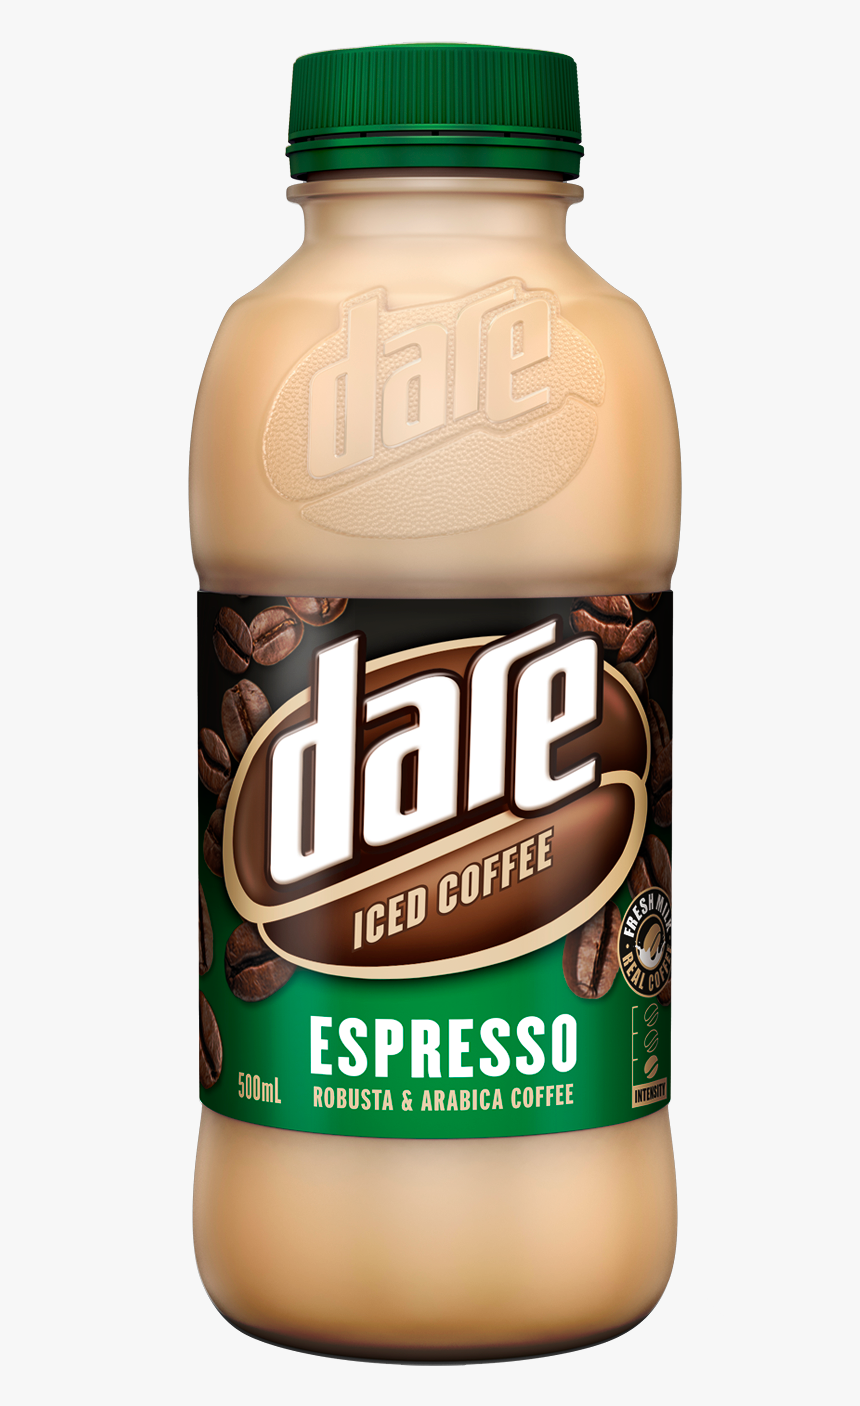 Dare Iced Coffee Espresso, HD Png Download, Free Download